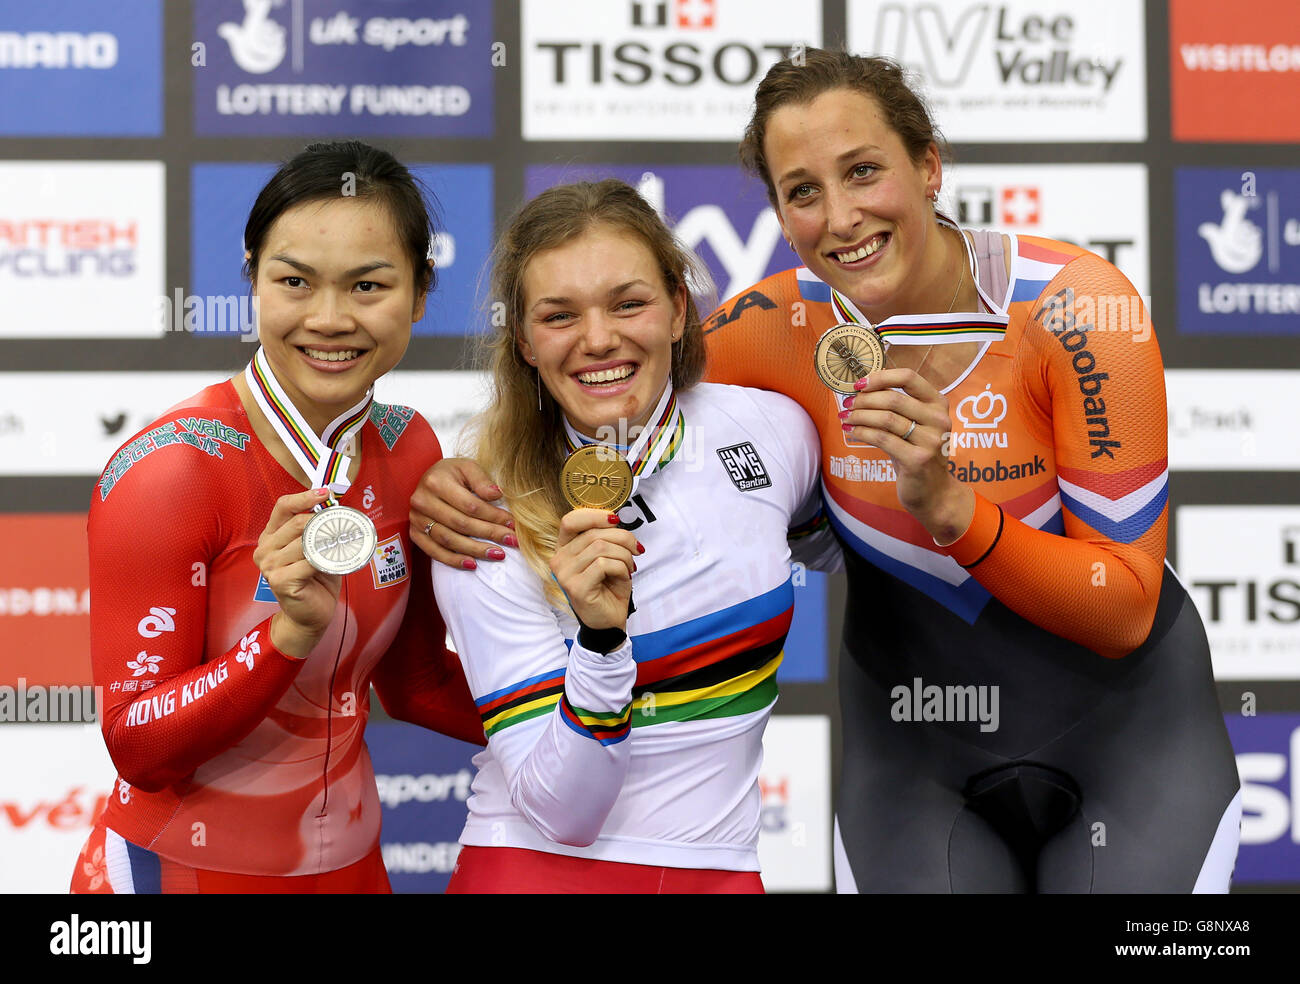 Gold medalist Russia's Anastasiia Voinova (centre) silver medalist Hong Kong's Wai Sze Lee (left) and bronze medalist Netherland's Elis Lightlee after the Women's 500m Time Trial during day three of the UCI Track Cycling World Championships at Lee Valley VeloPark, London. PRESS ASSOCIATION Photo. Picture date: Friday March 4, 2016. See PA story CYCLING World. Photo credit should read: Tim Goode/PA Wire. Stock Photo